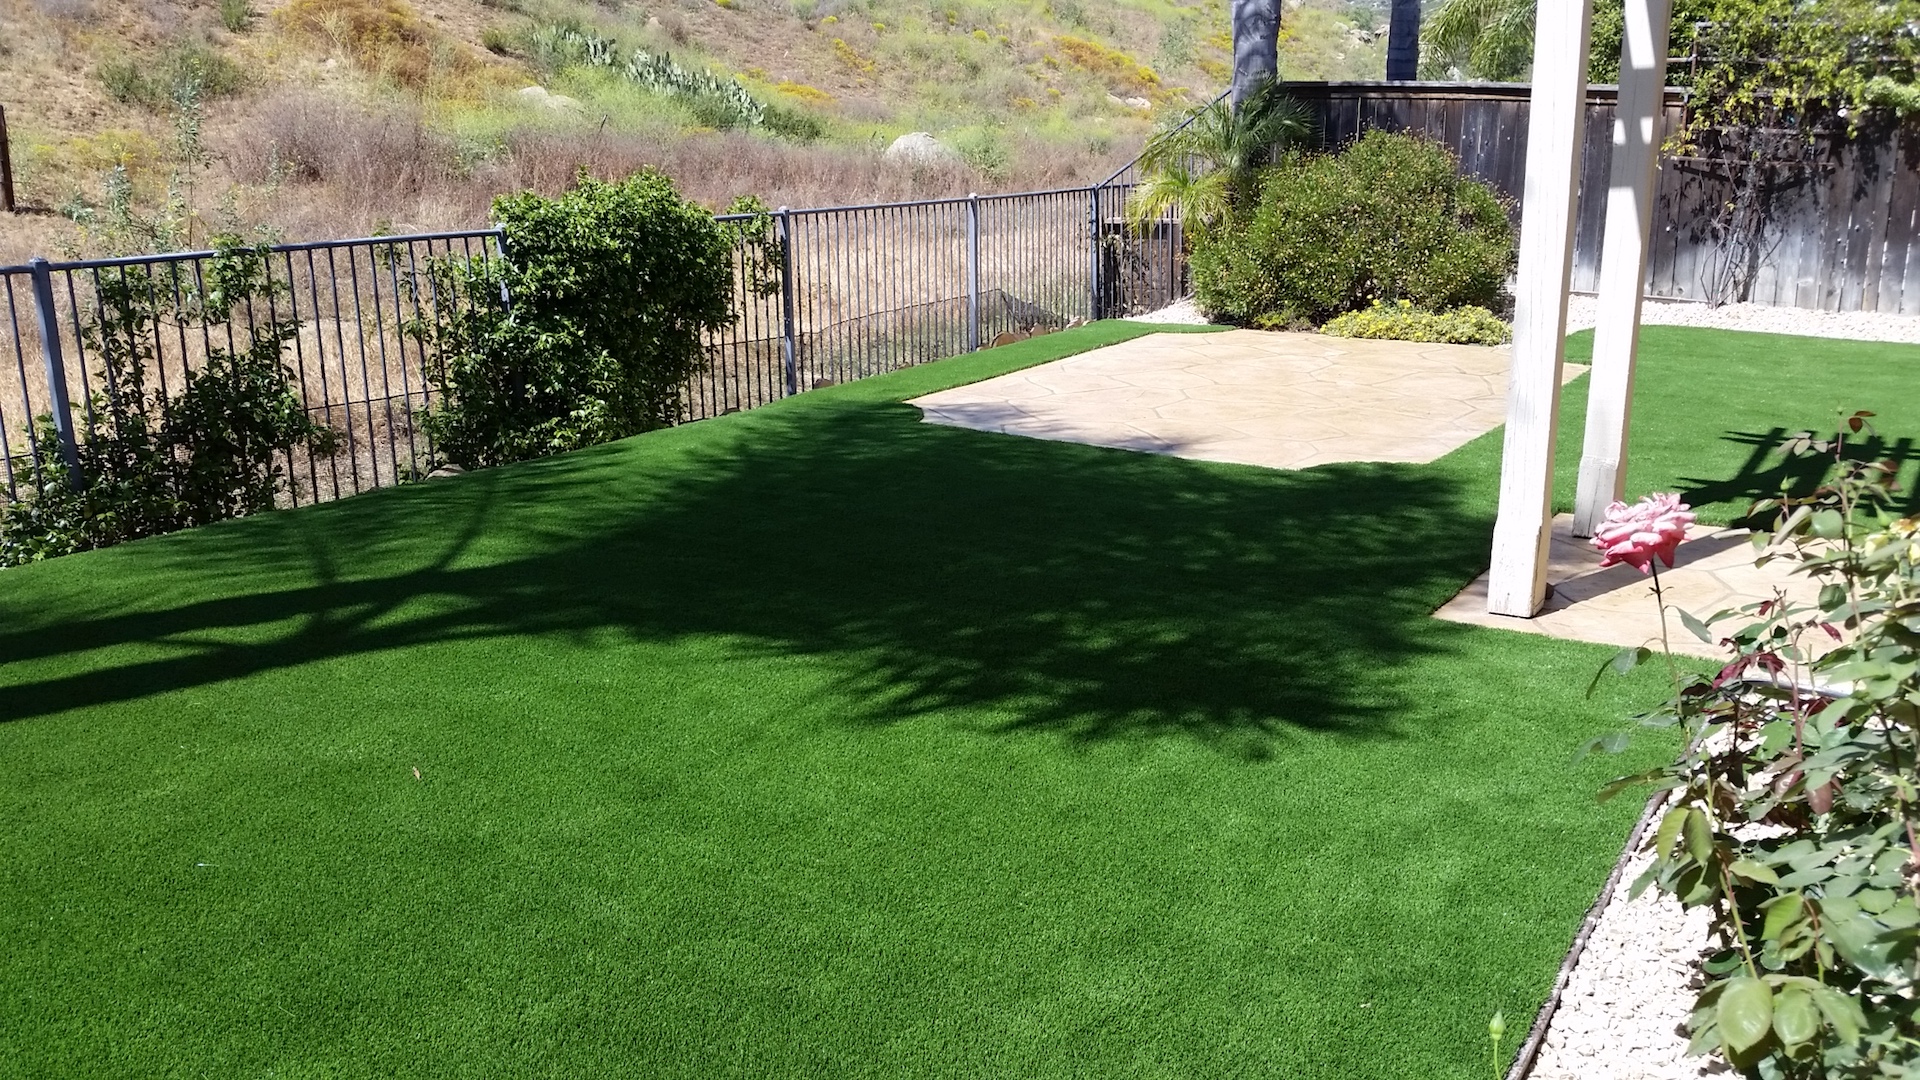 How To Install Artificial Grass On Deck In San Diego?